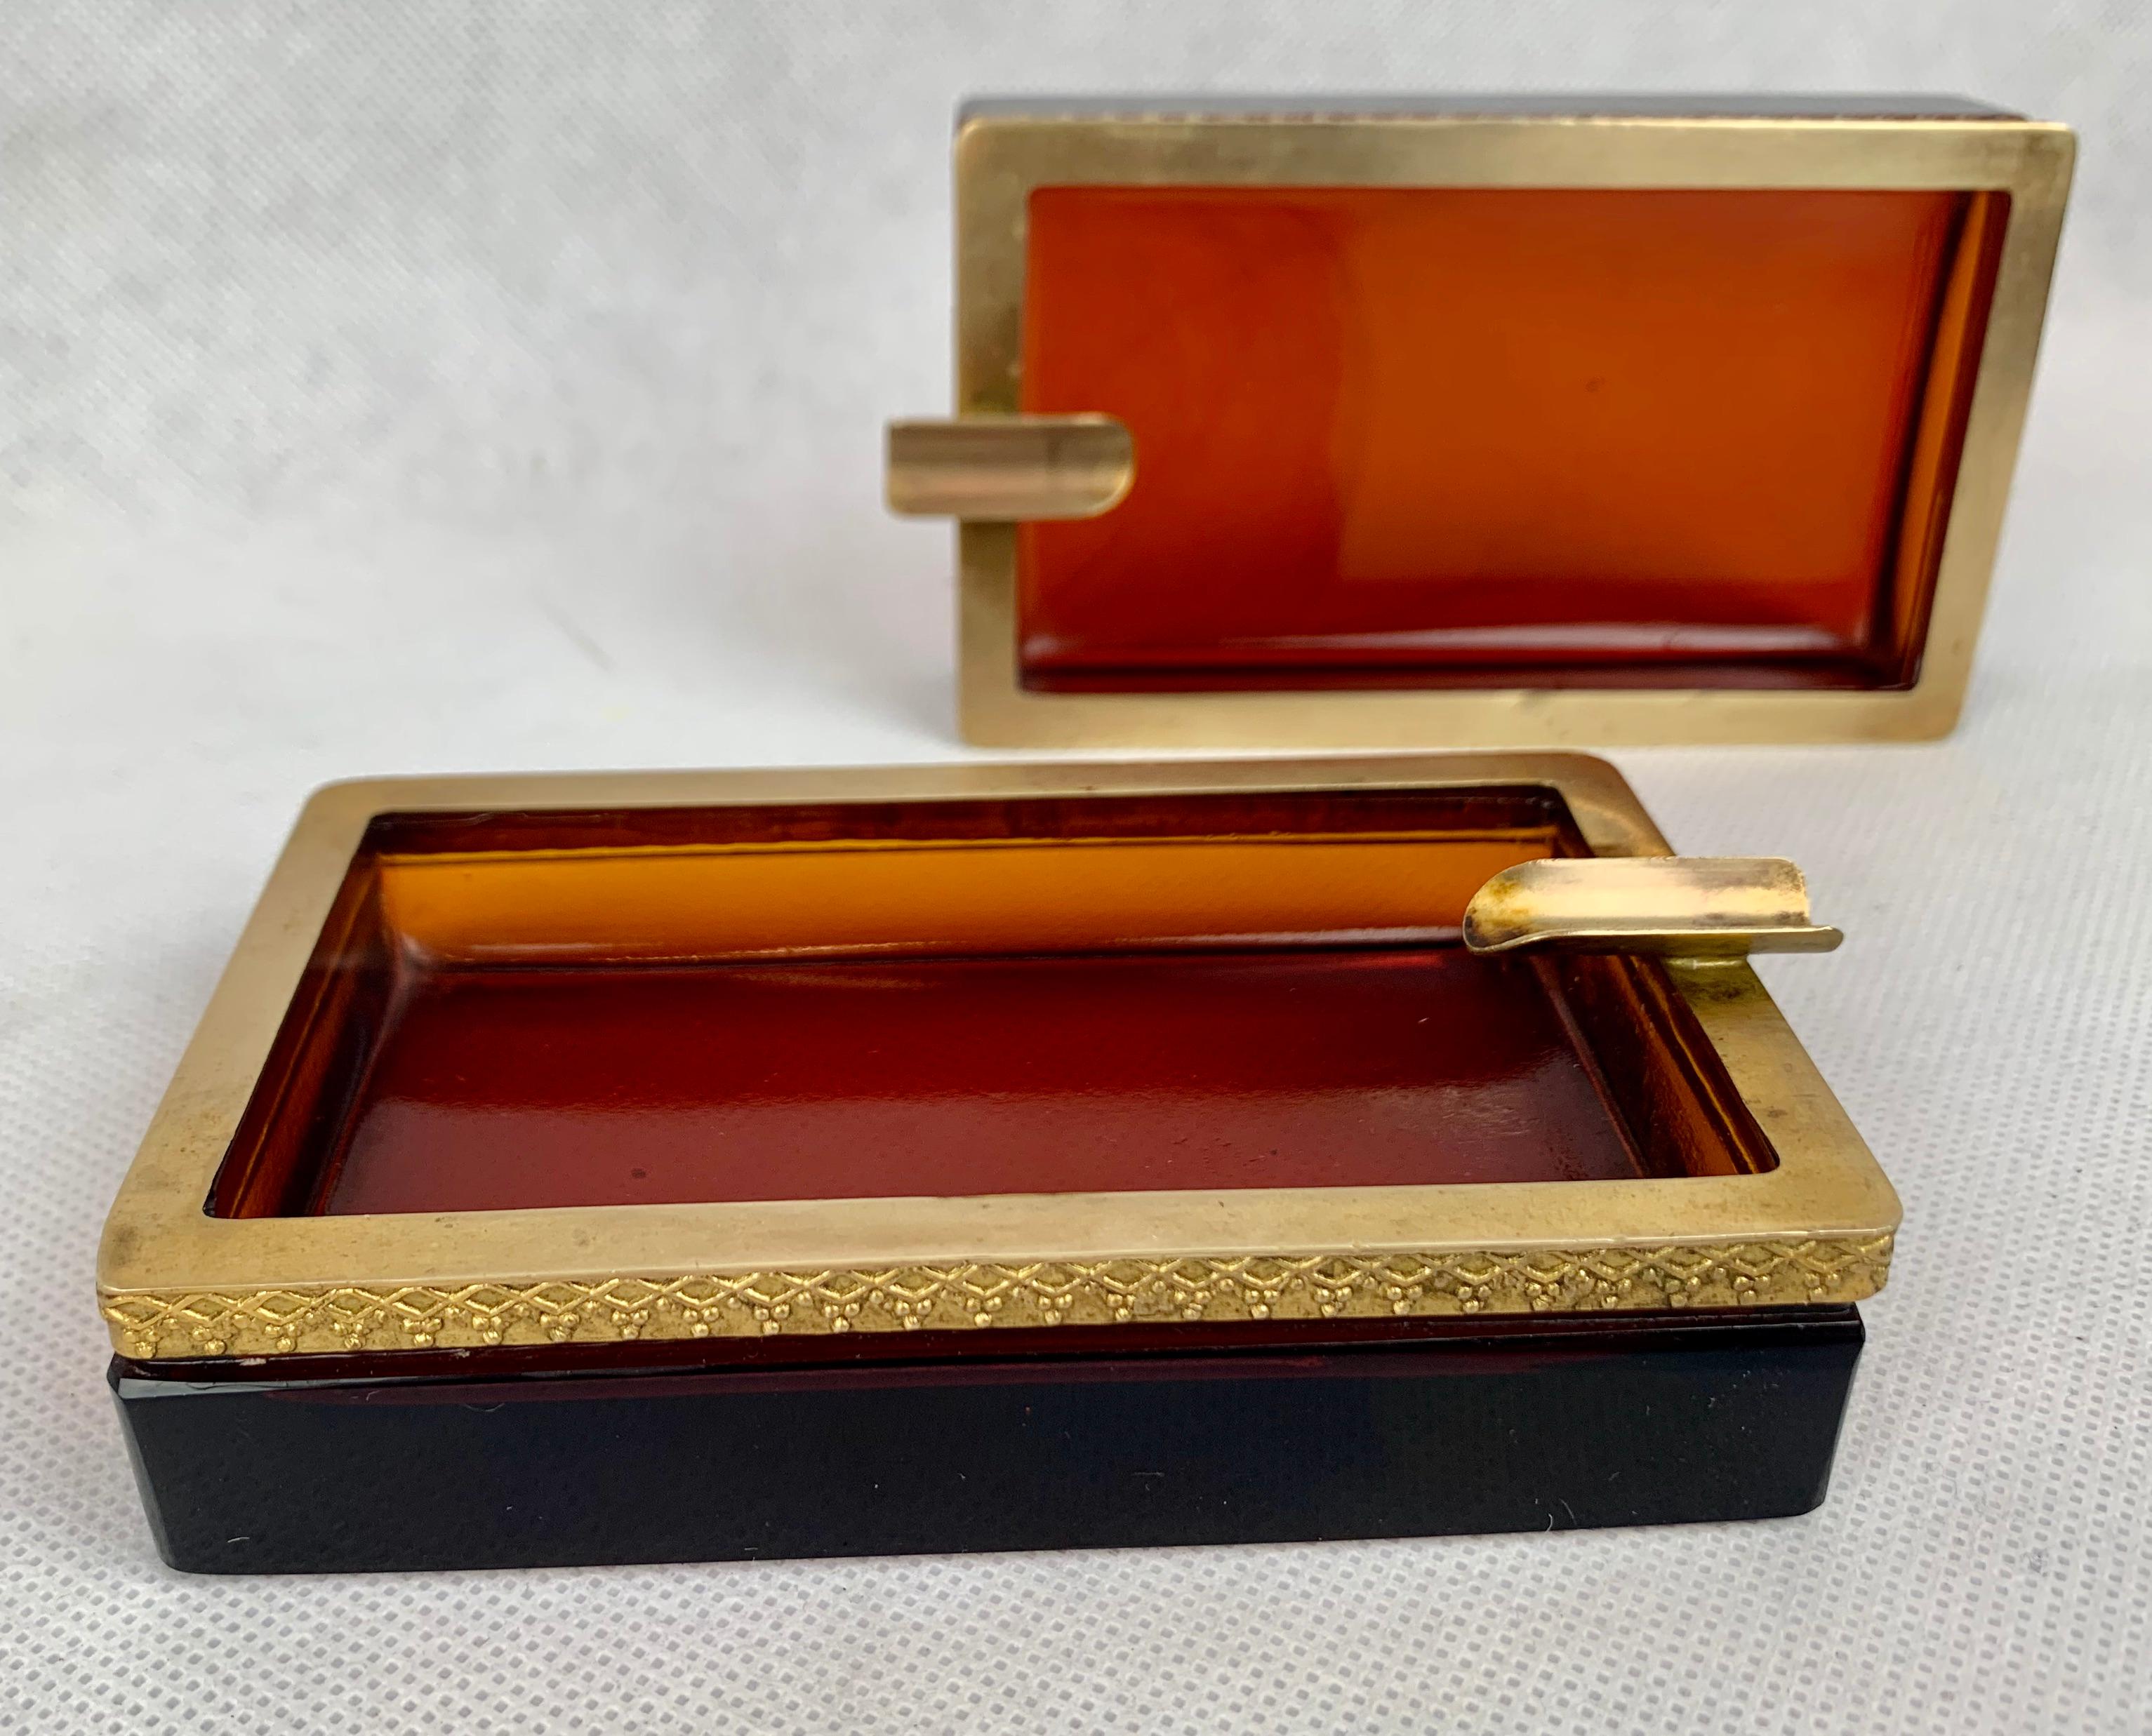 Pair of Cenedese Murano glass gorgeous amber and gold ashtrays. The warm amber color is enhanced by the gilt border in relief. There is some darkening of the border due to cigarette usage. Don't smoke, use them for munchies on a coffee table or as a